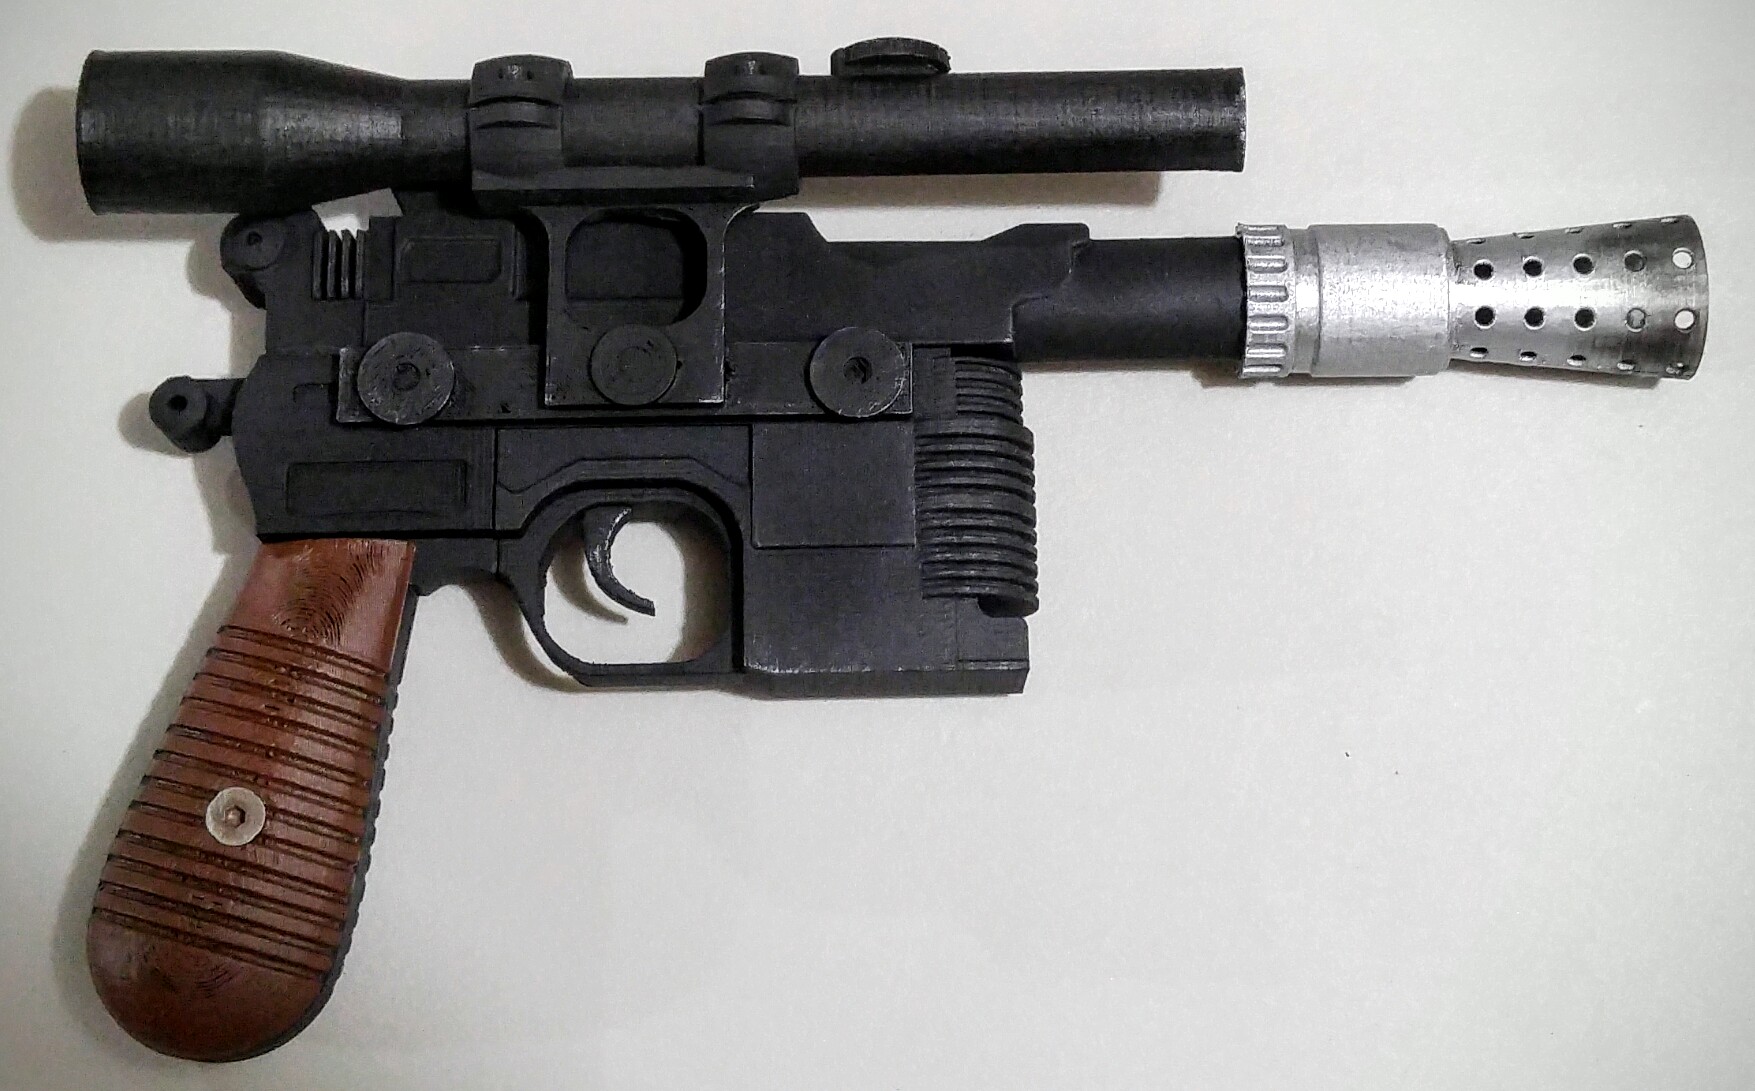 How to pick the perfect hot glue gun (that also just happens to look like a  sci-fi blaster)